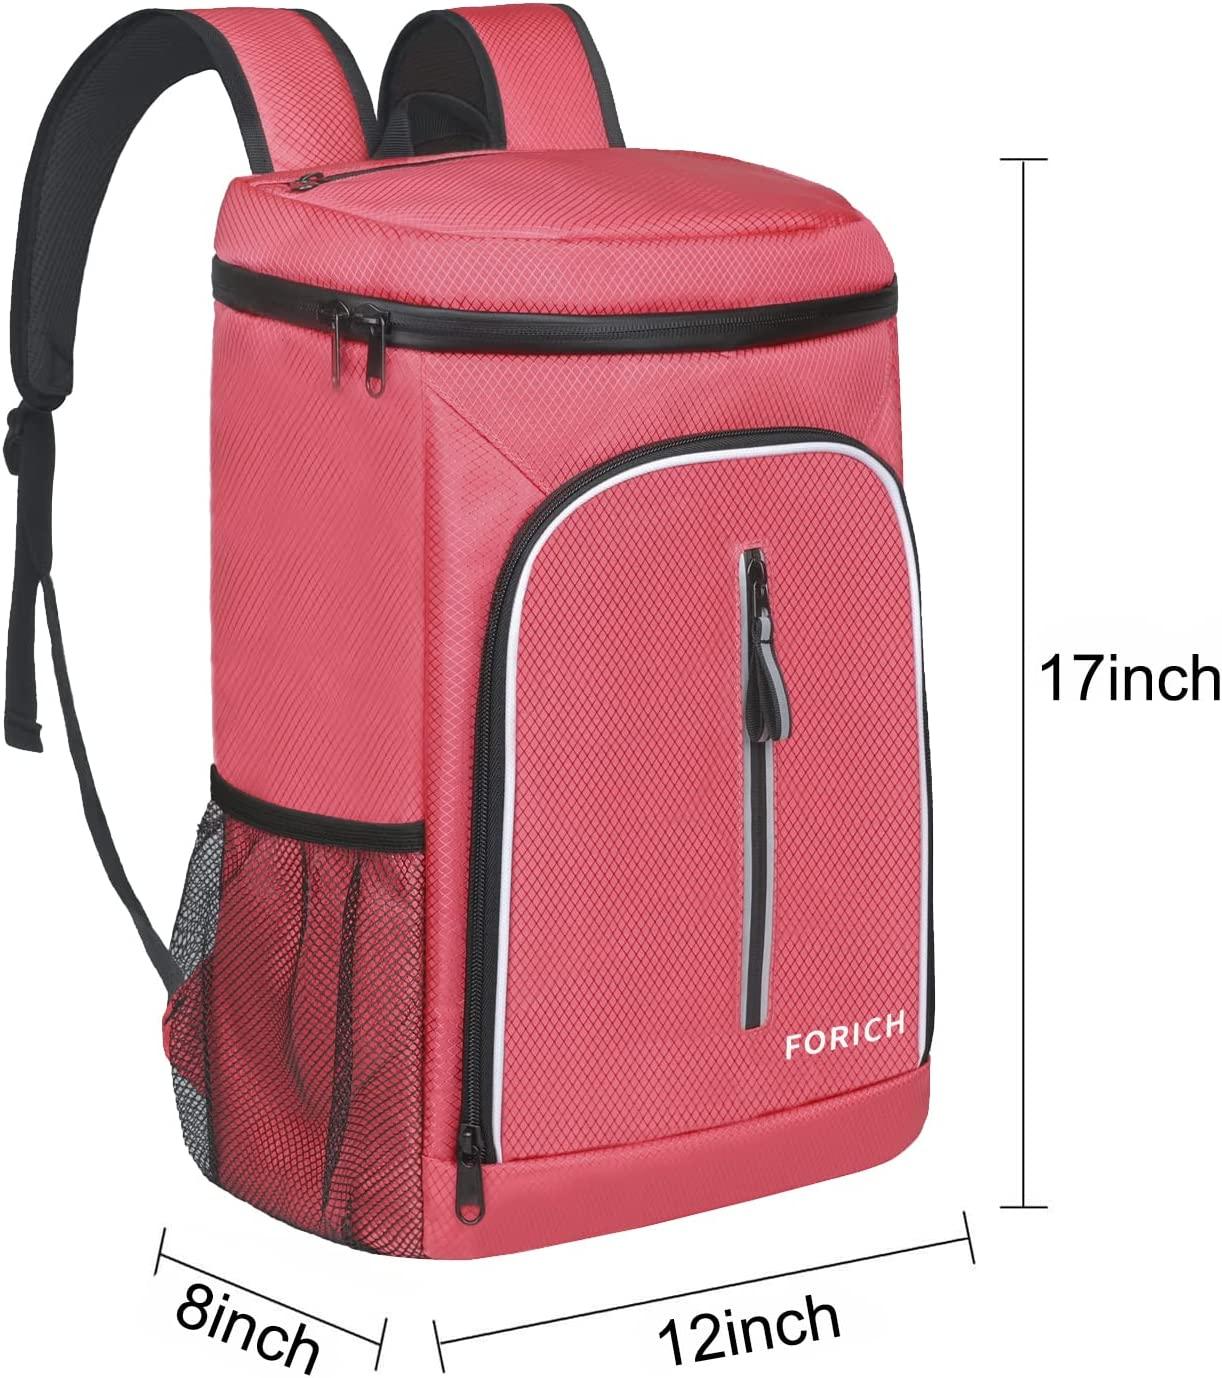 FORICH Soft Cooler Backpack Insulated Waterproof Backpack Cooler